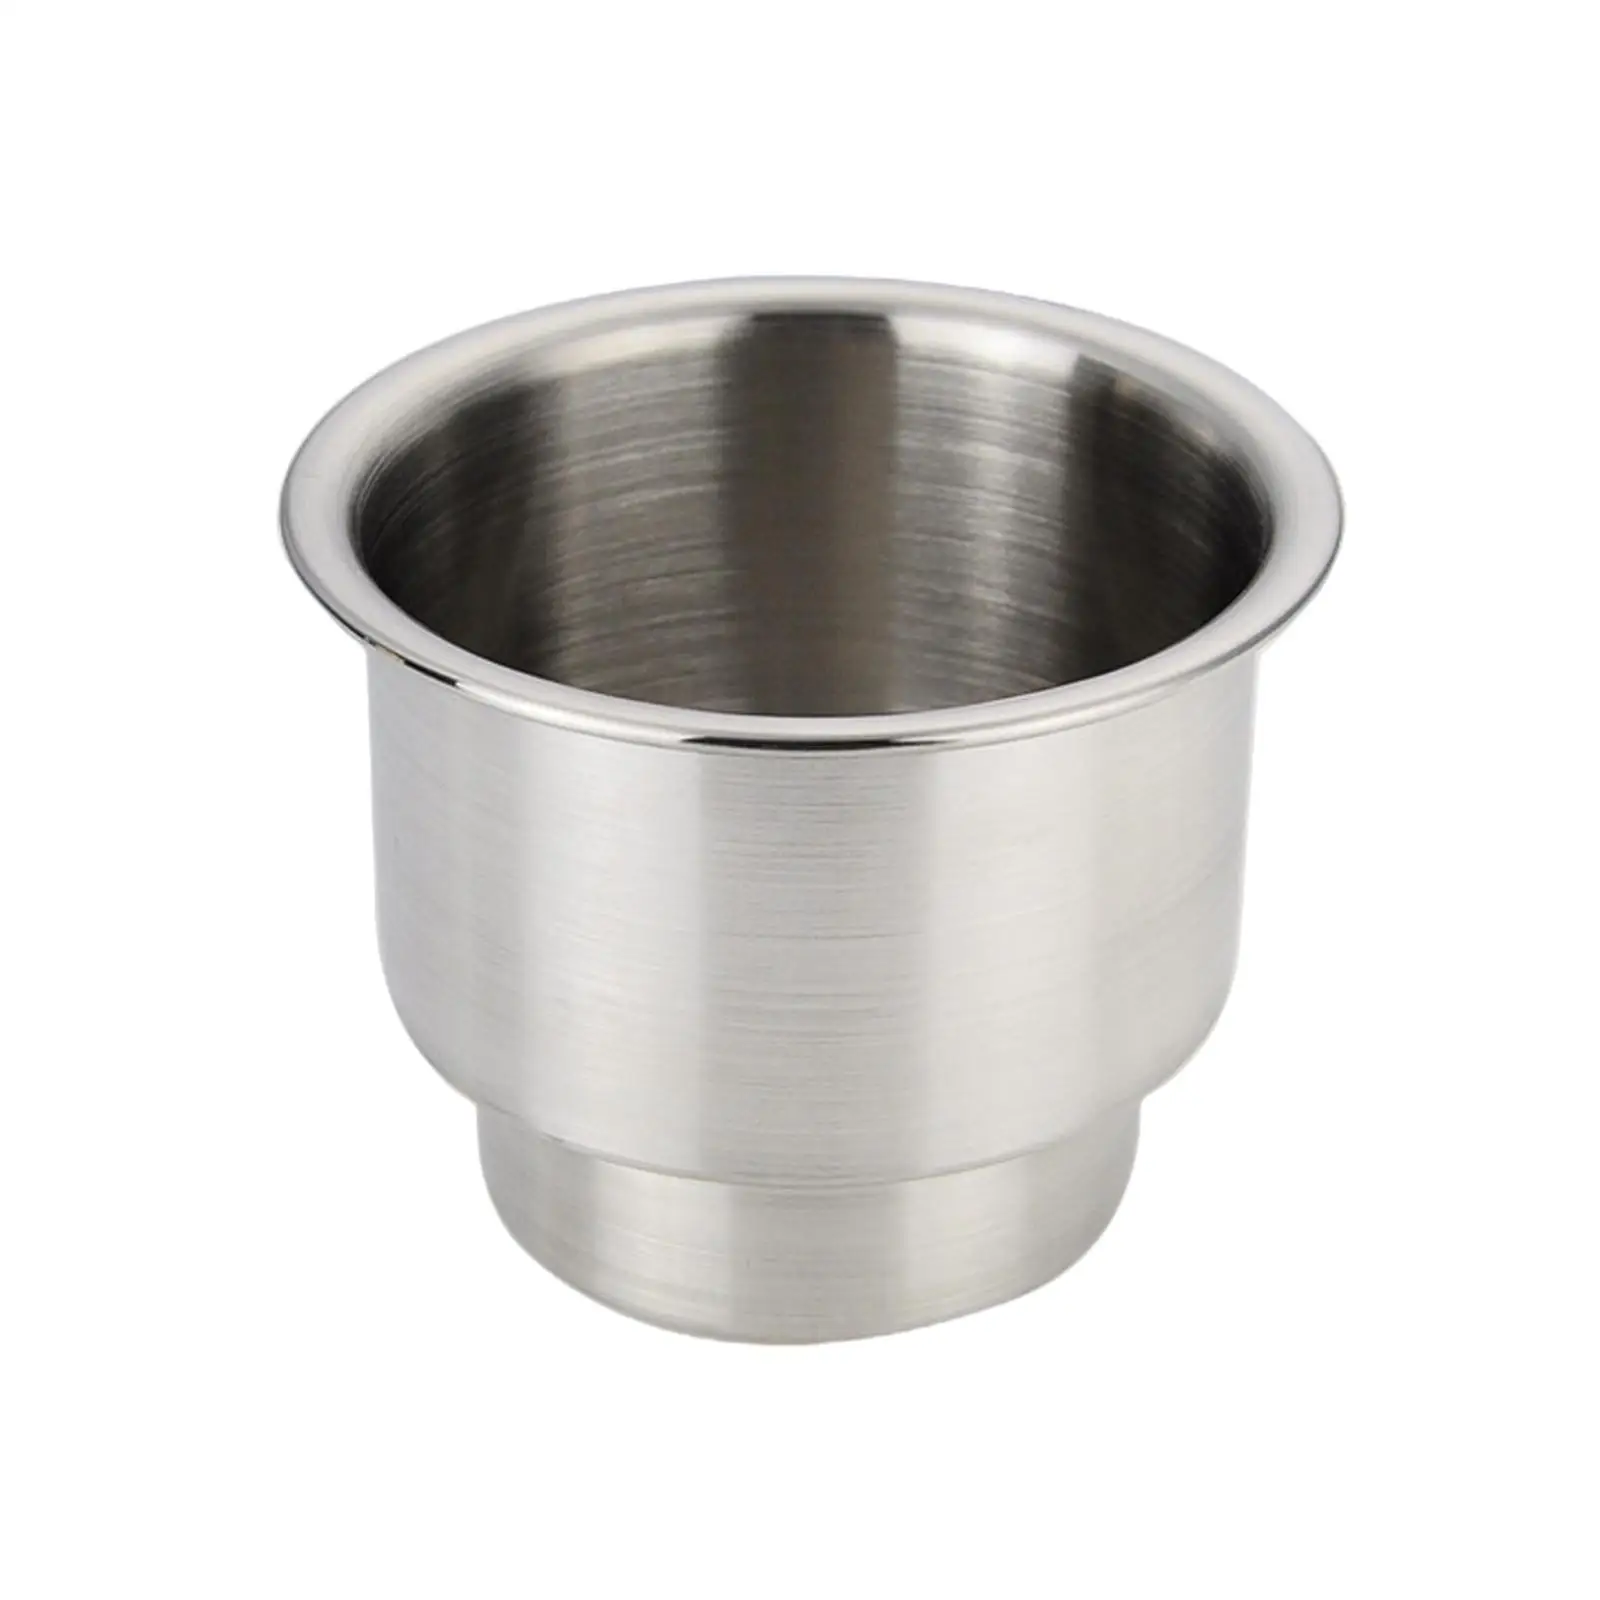 Cup Drink Holder, Stainless Steel, Bottle Holder, Fit for 110x83mm Car Accessories